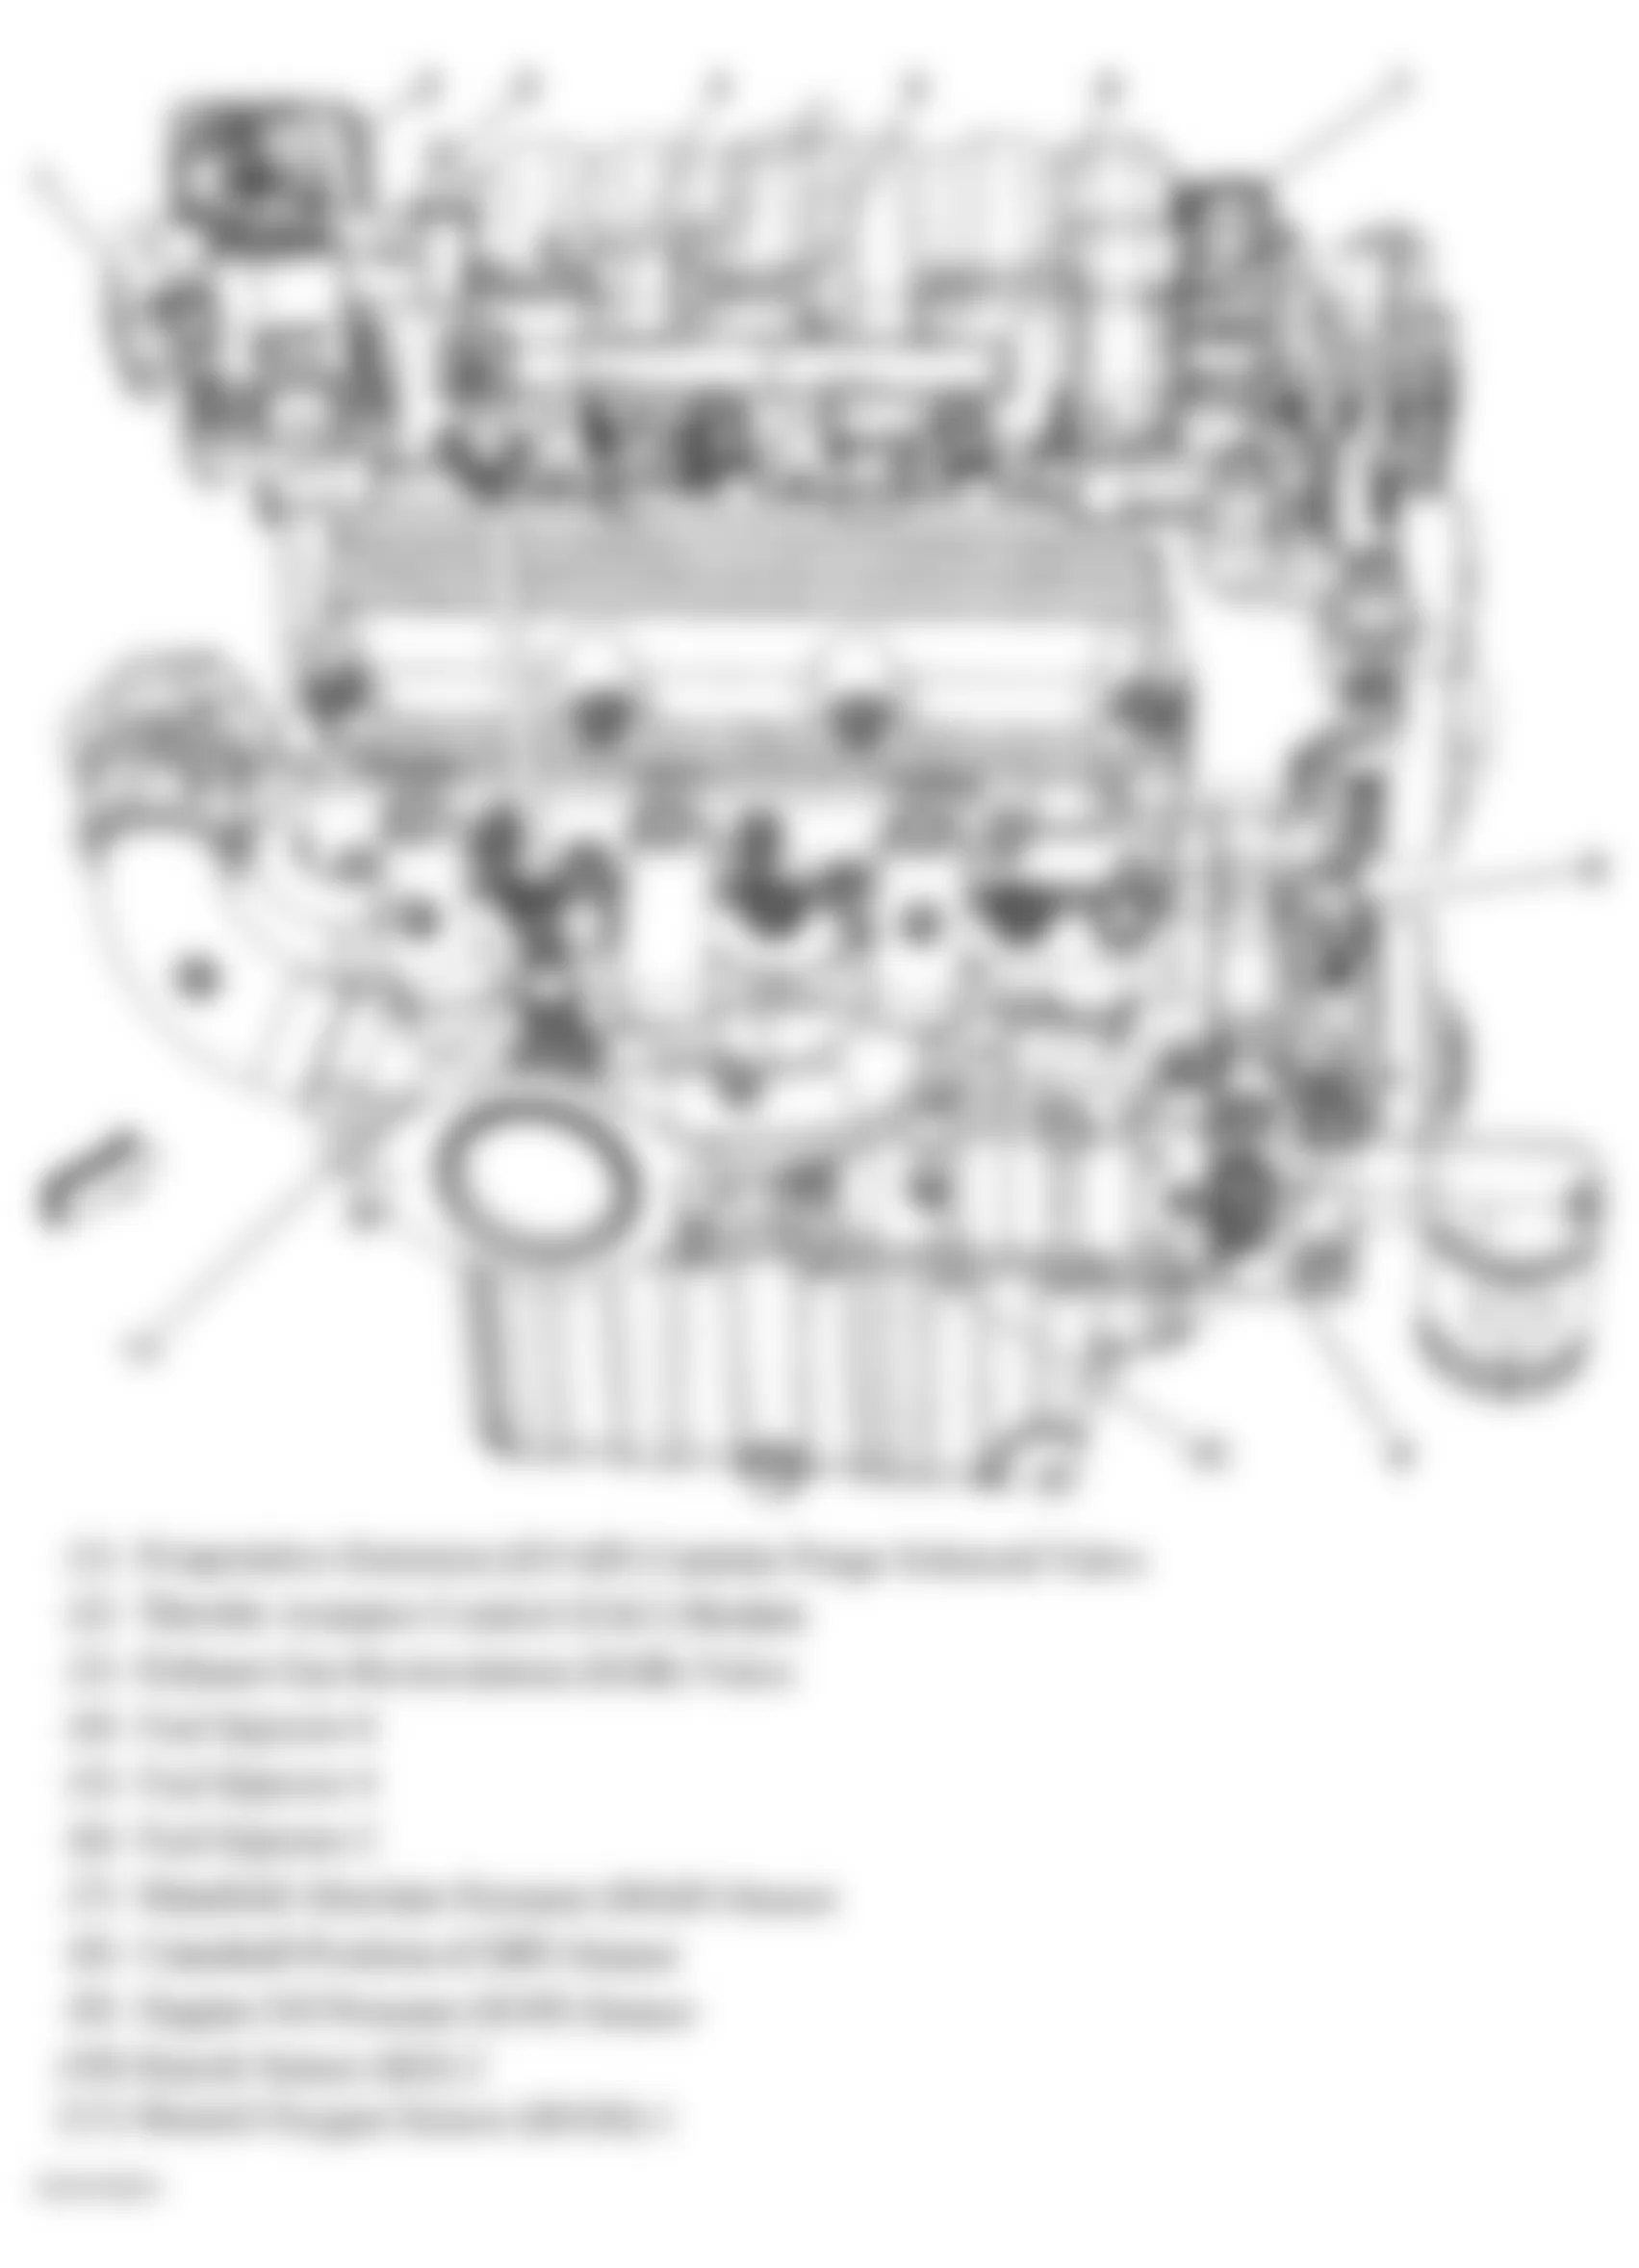 Buick Lucerne CX 2006 - Component Locations -  Right Side Of Engine (3.8L)